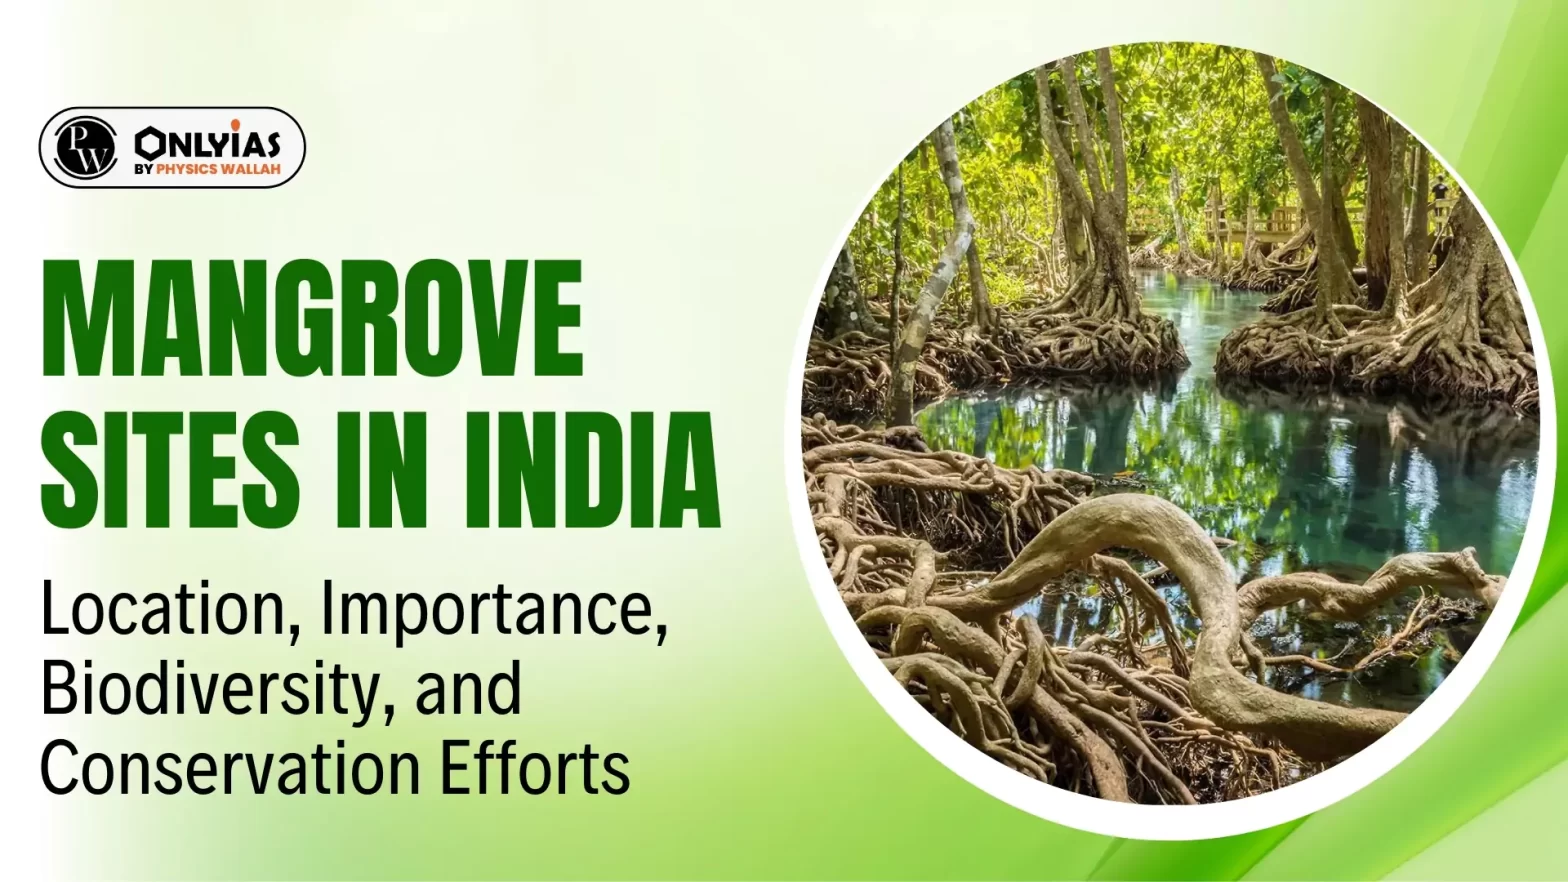 Mangrove Sites in India: Location, Importance, Biodiversity, and Conservation Efforts